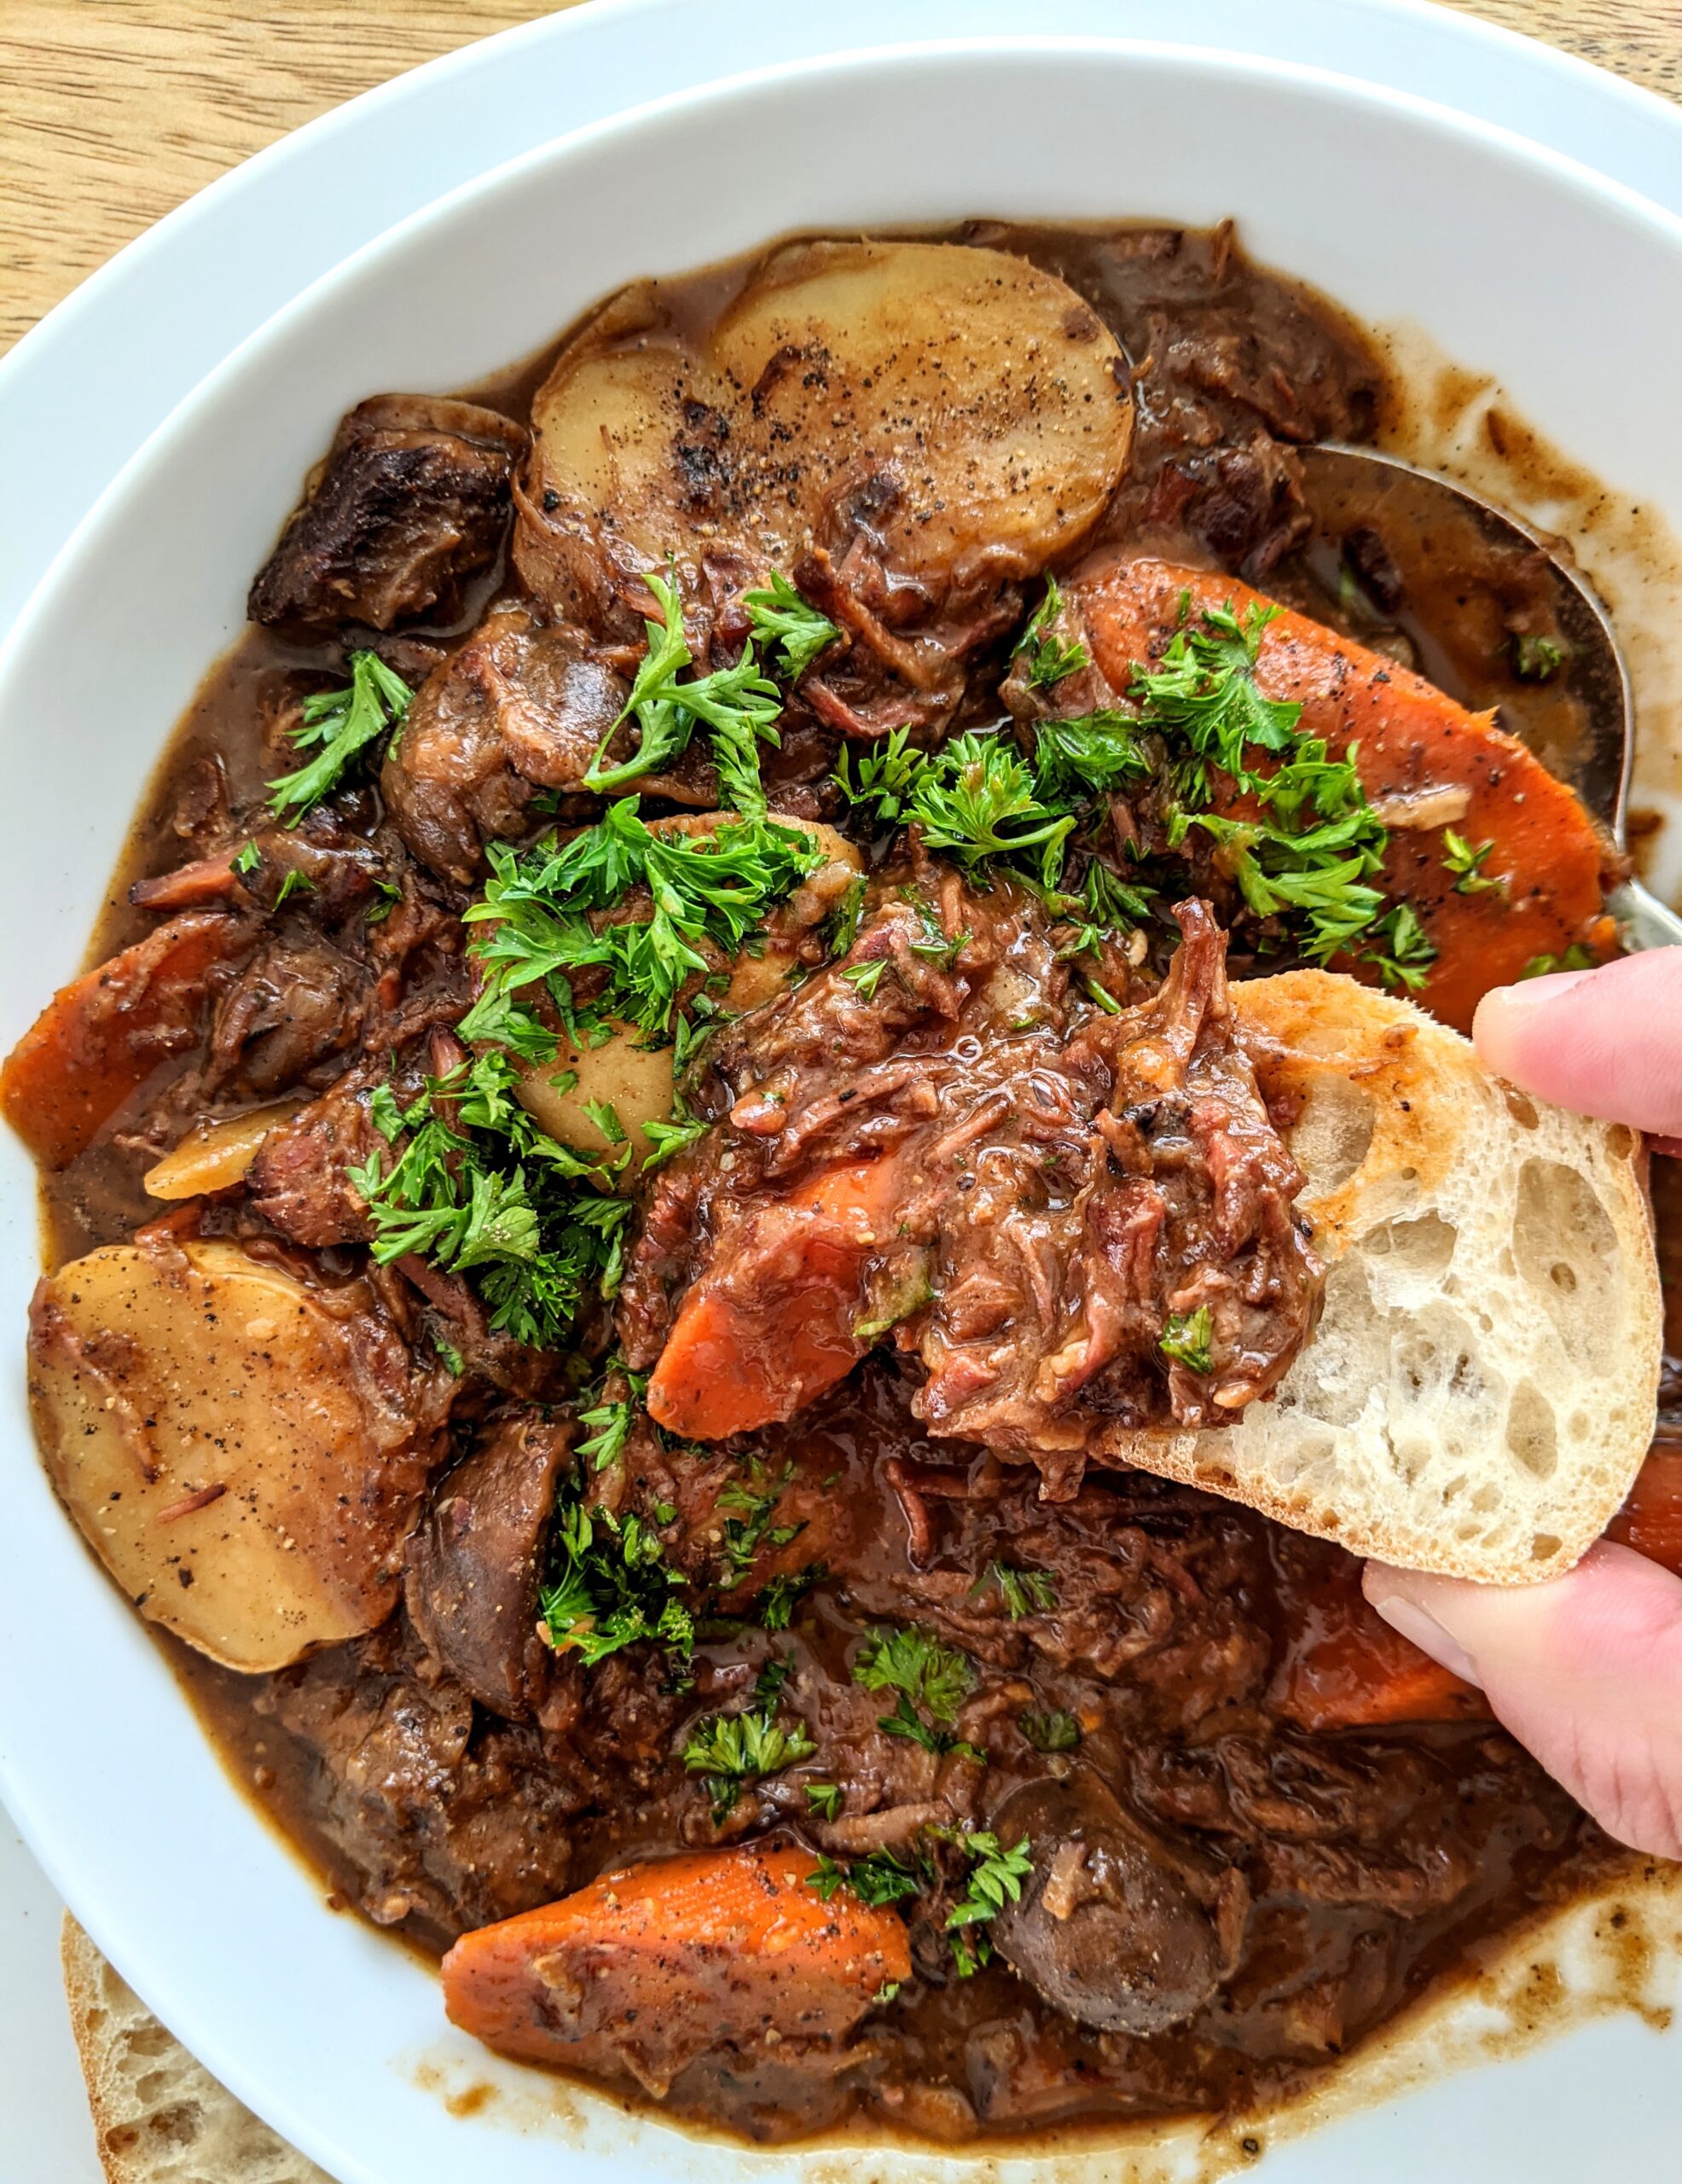 A piece of French bread being dunked into a hearty beef stew; a French classic. Several hours of braising in the oven resulting in tender meat that melts into the stew.